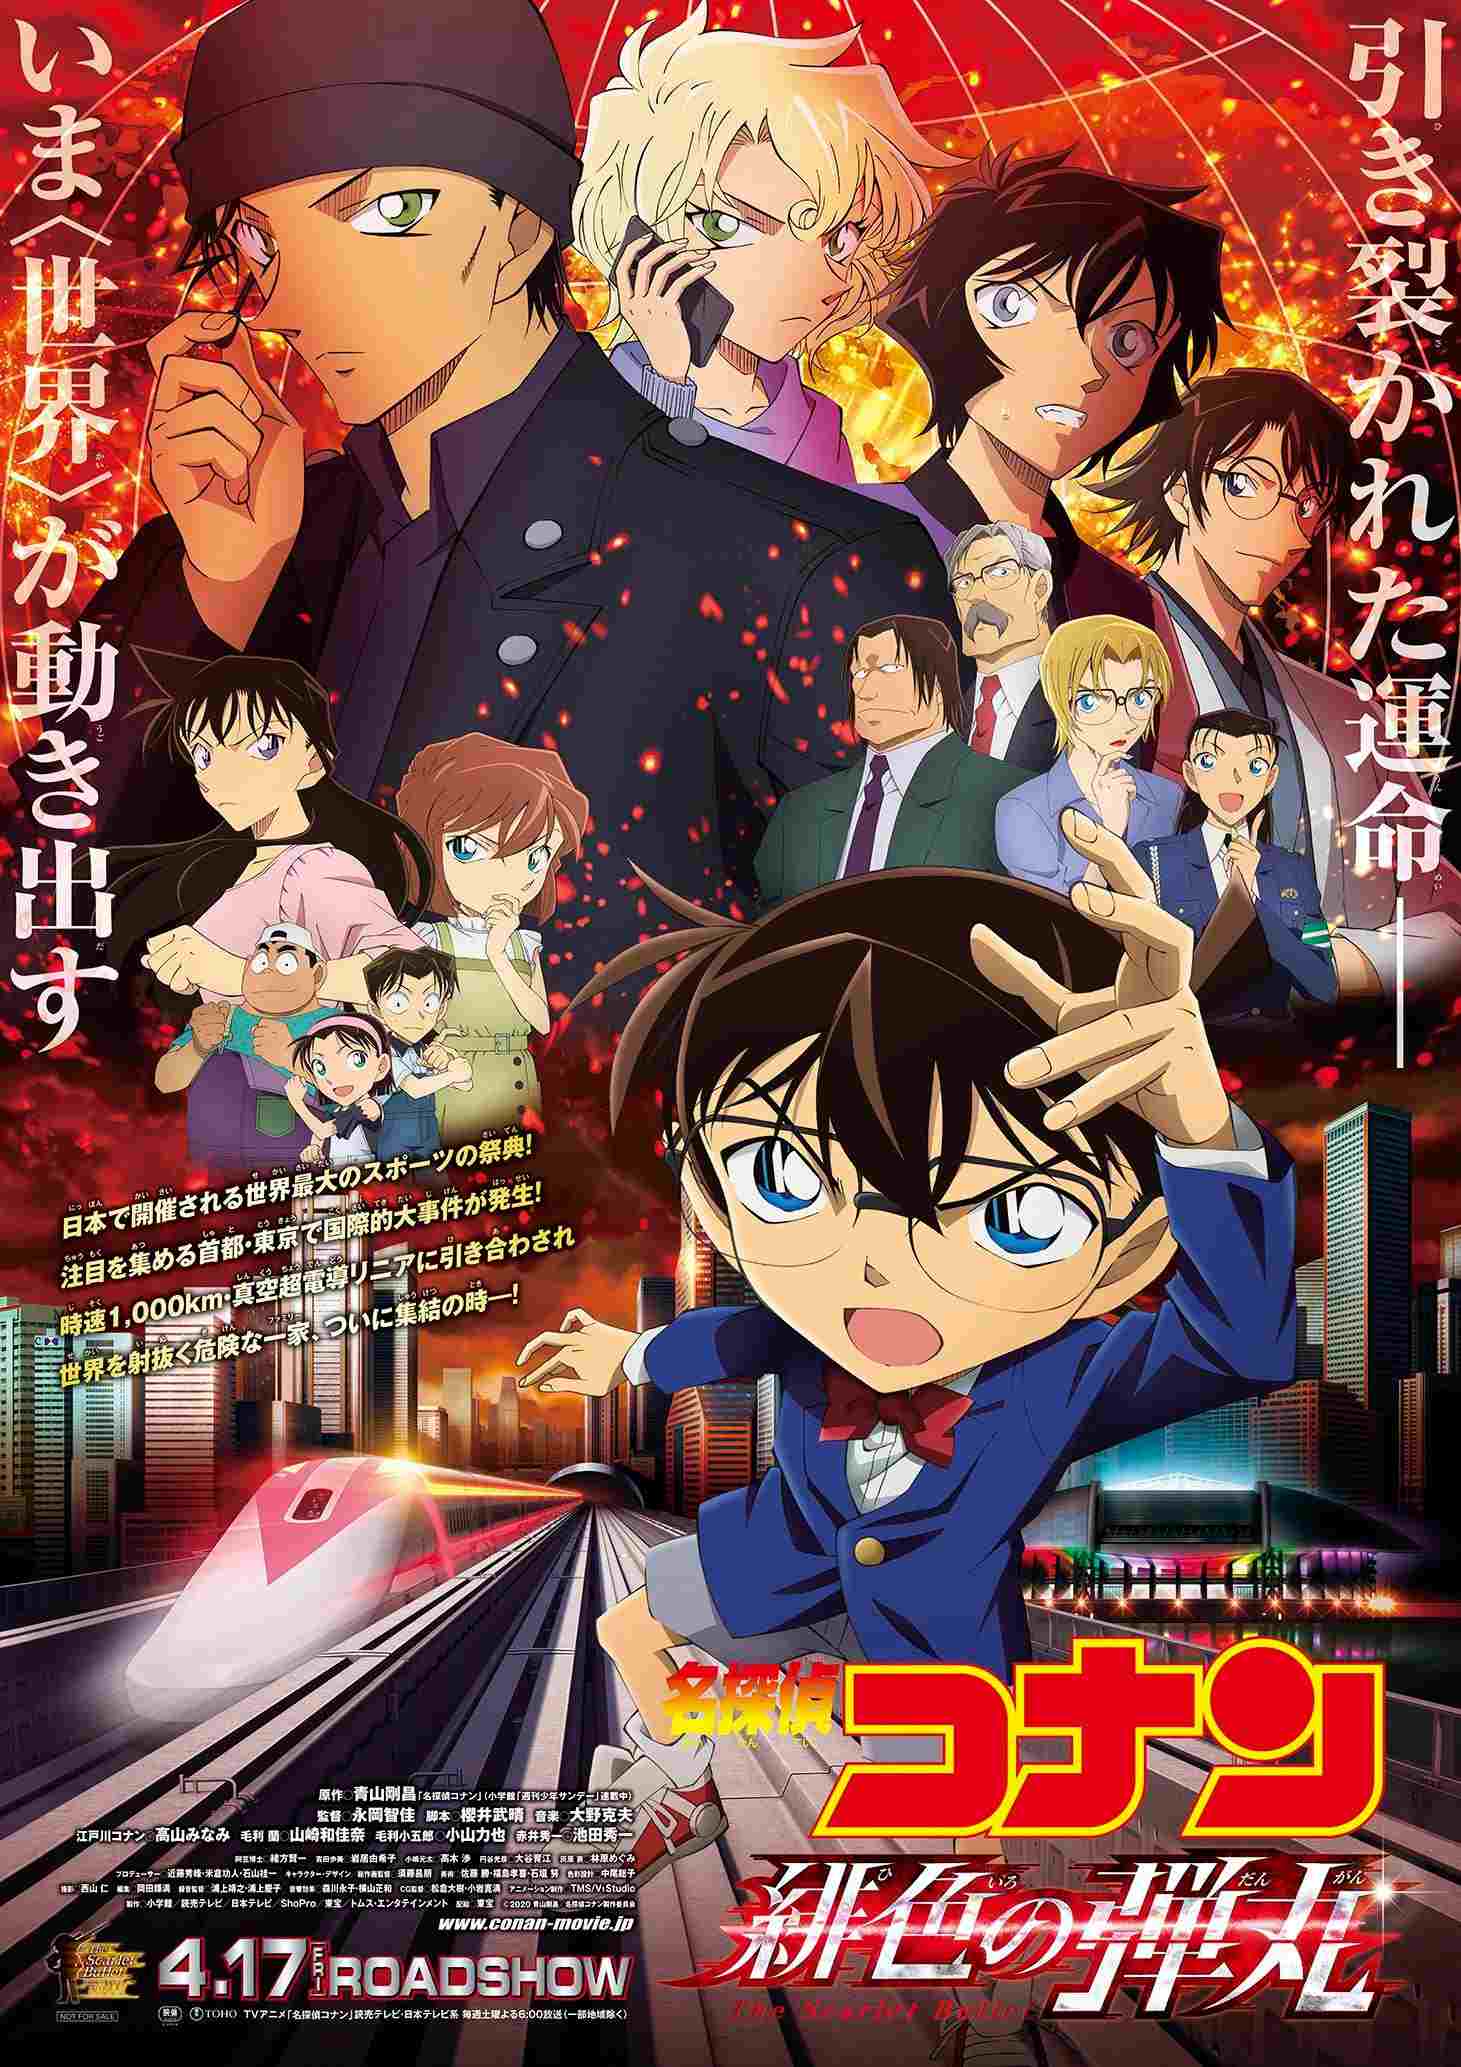 New Anime Movies 2021 6 - detective conan the scarlet bullet